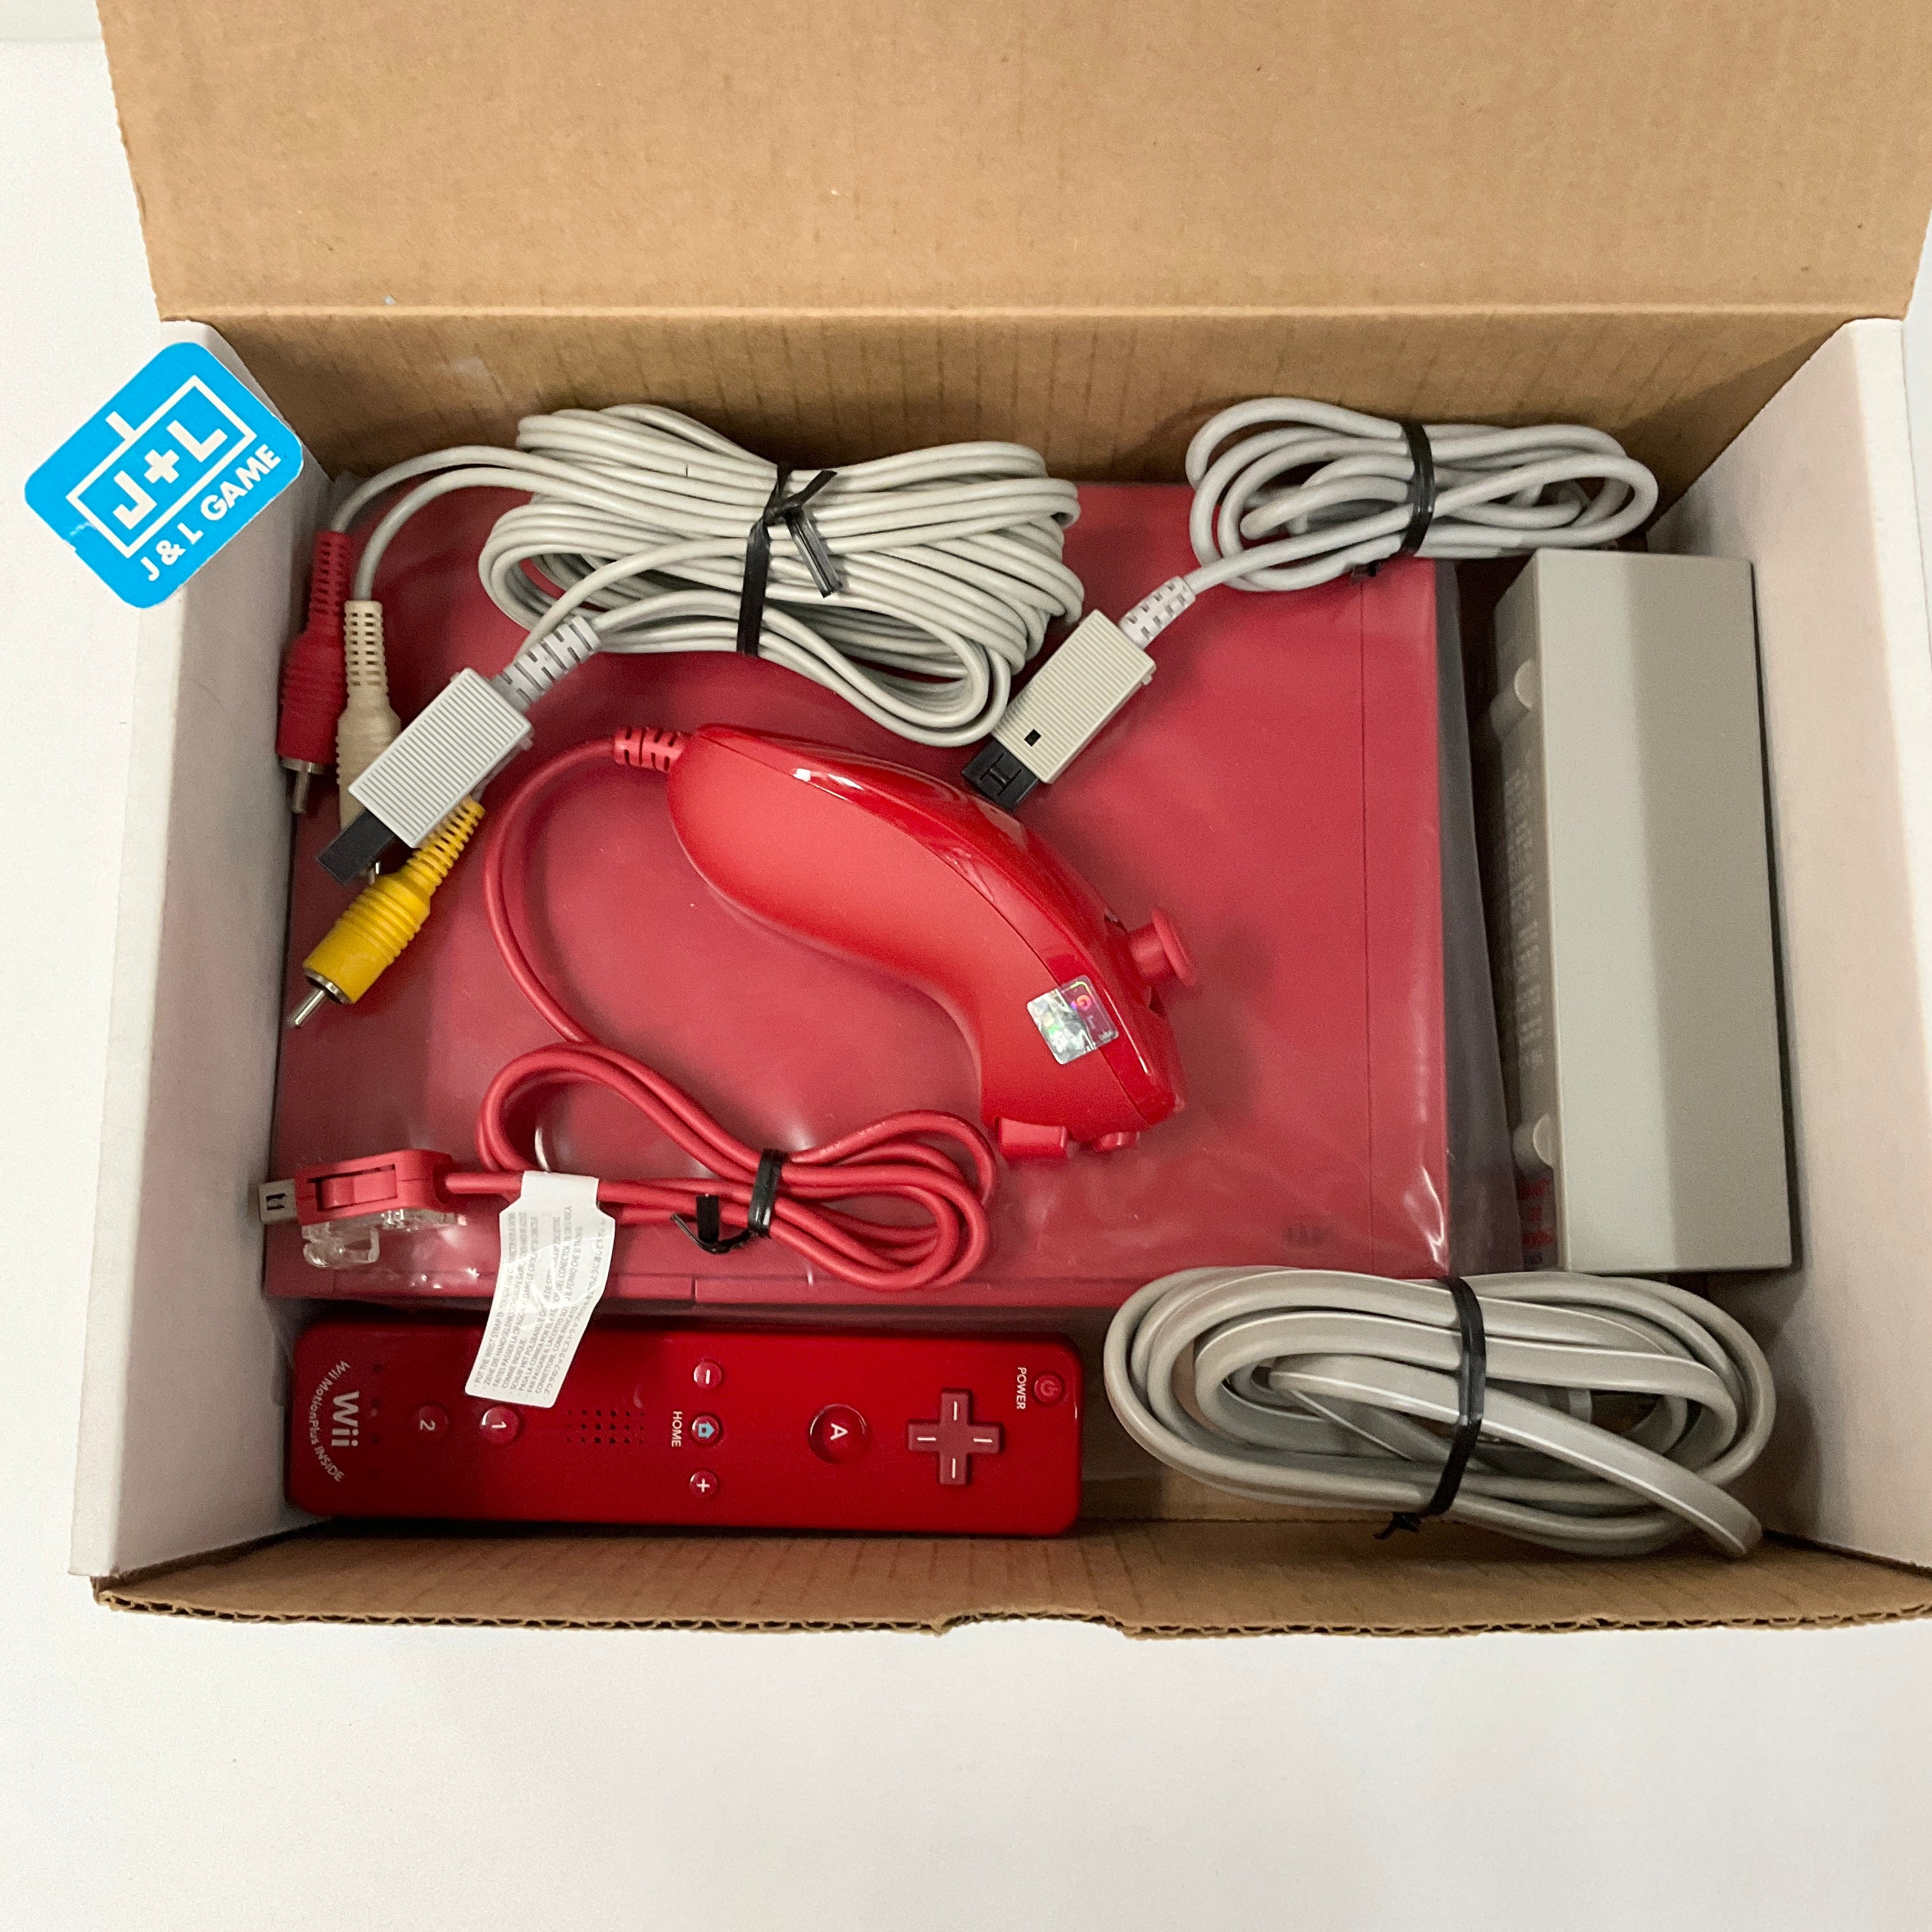 Authentic Red Wii Mini Console + Cords + Pick Controllers + US Seller